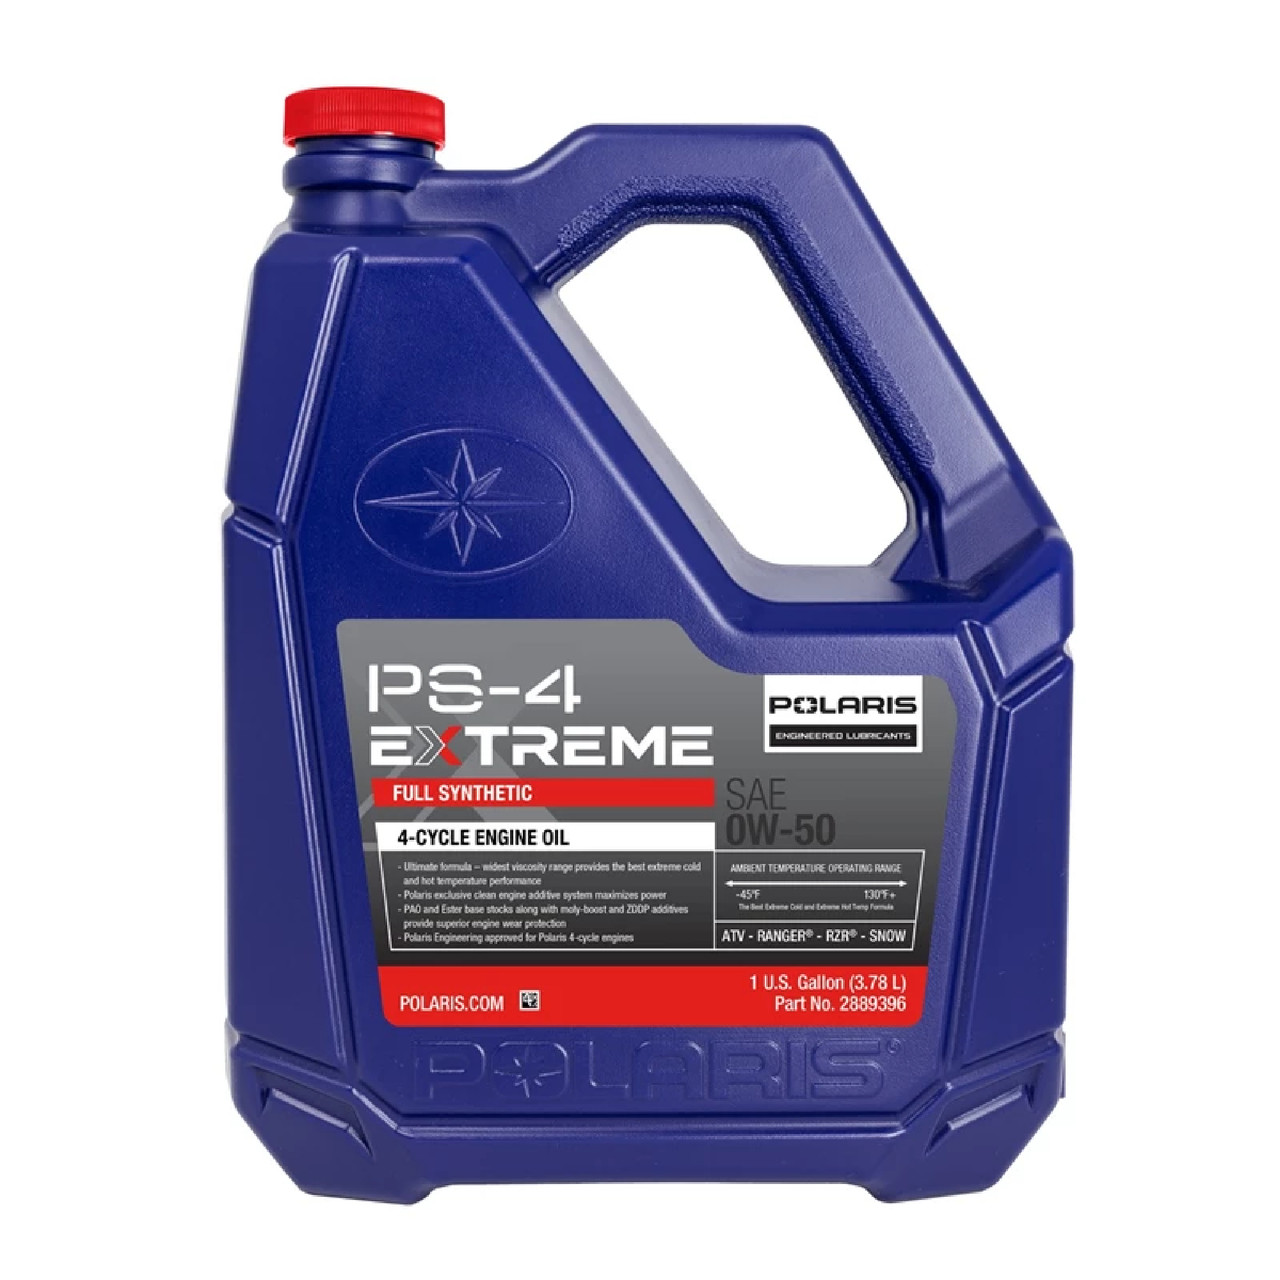 Polaris New OEM PS-4 Extreme Full Synthetic 0W-50 Engine Oil 1 Gallon 2889396